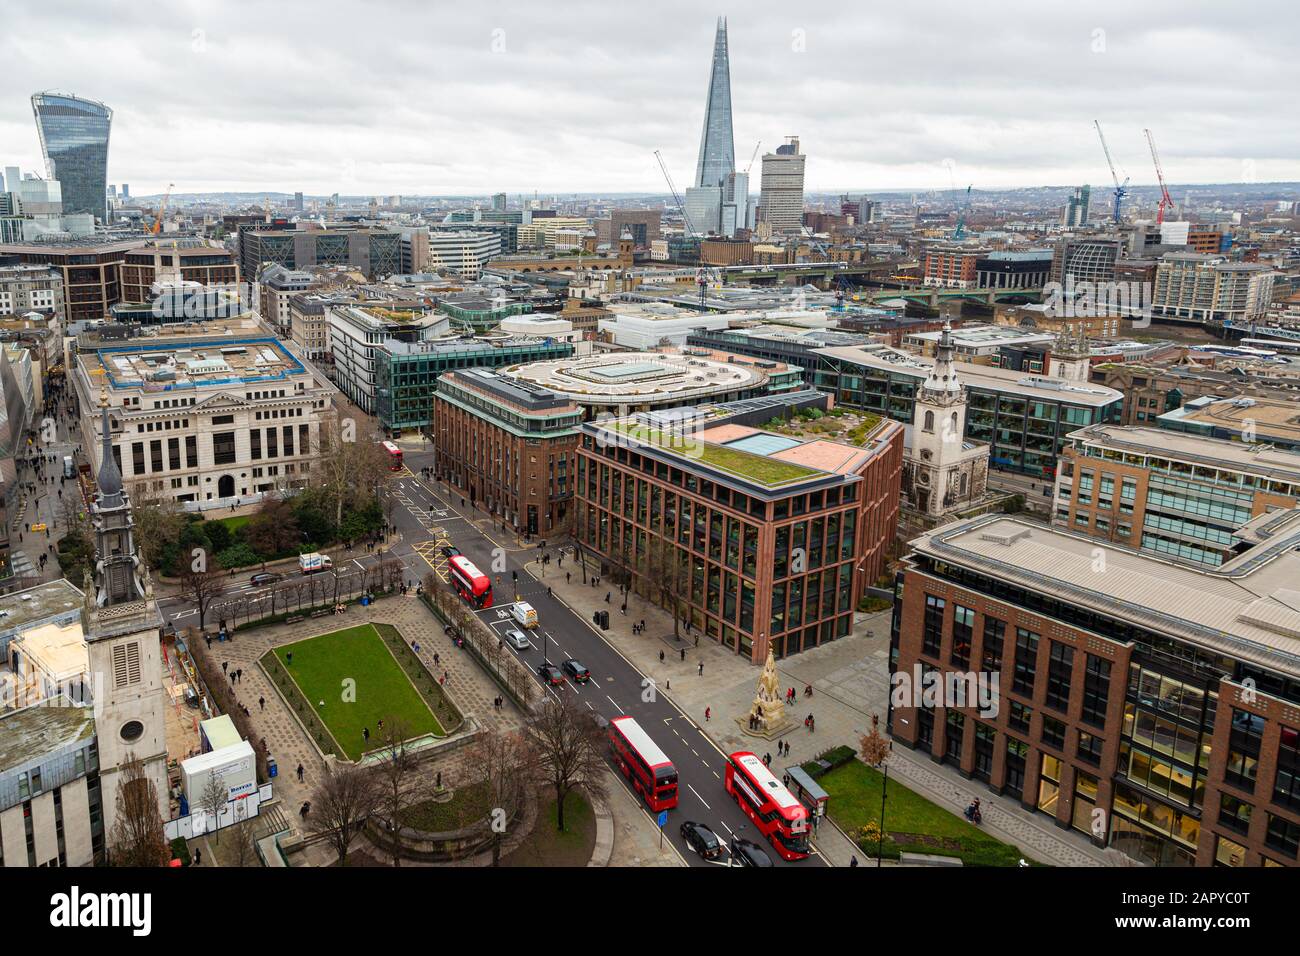 London,UK - January 2, 2020: Aerial view of London from St Paul's Cathedral on a cloudy day Stock Photo